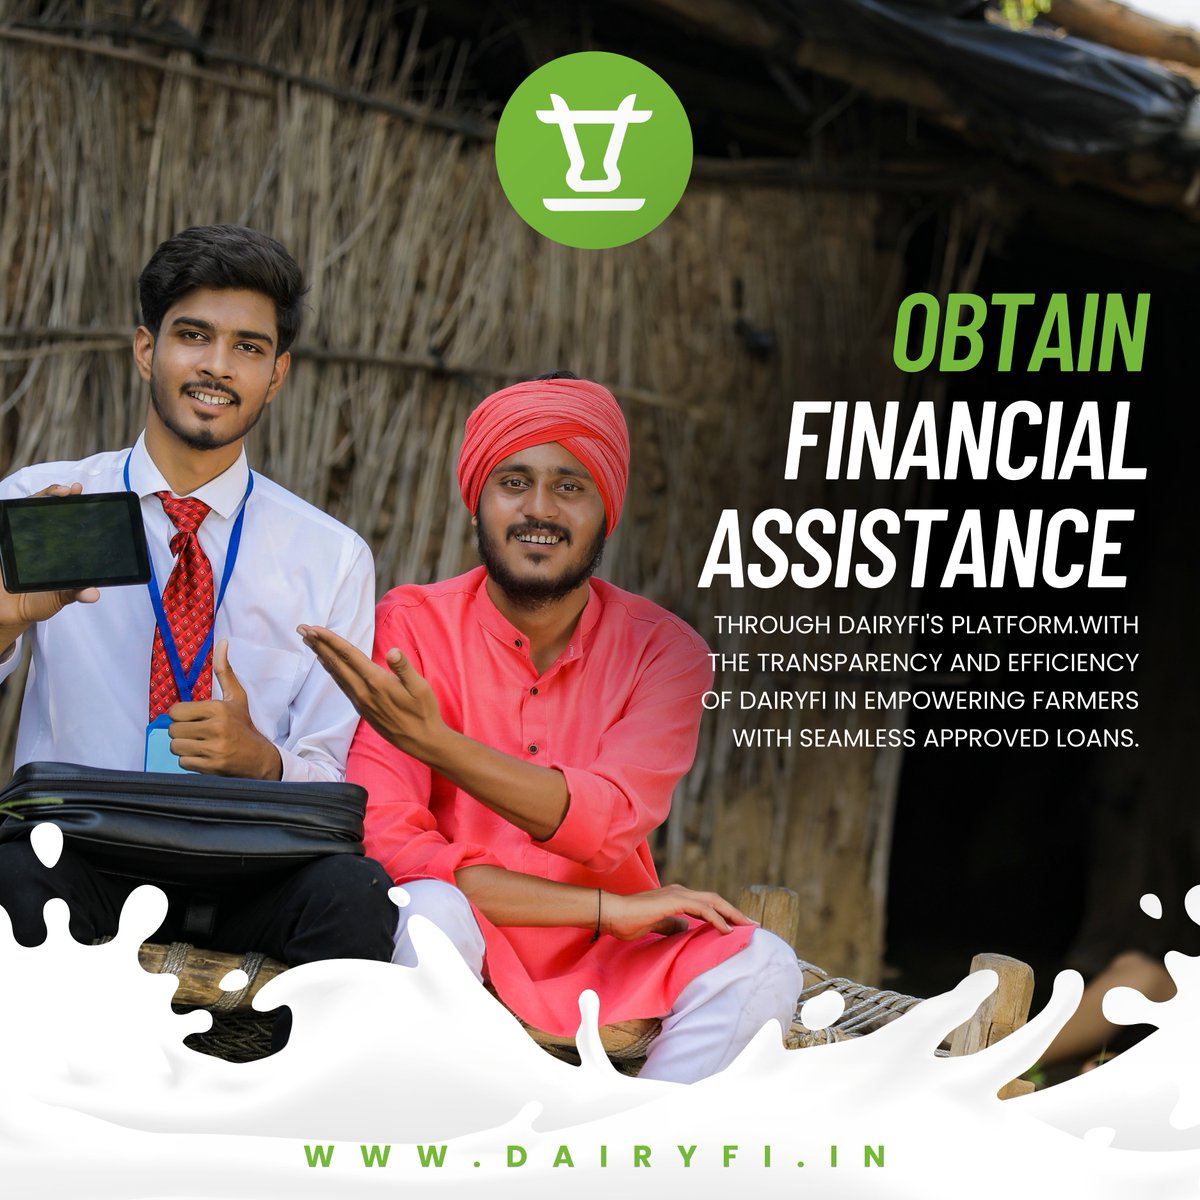 Navigating finance just got easier with DairyFi!🤑💼
Achieve your farming dreams with our SEAMLESS approved loans. 🐮🌱
Transparency & efficiency at your fingertips!👨‍🌾

#DairyFiFinance #dairyfi
#FarmingDreams
#SeamlessLoans
#EasierFinance